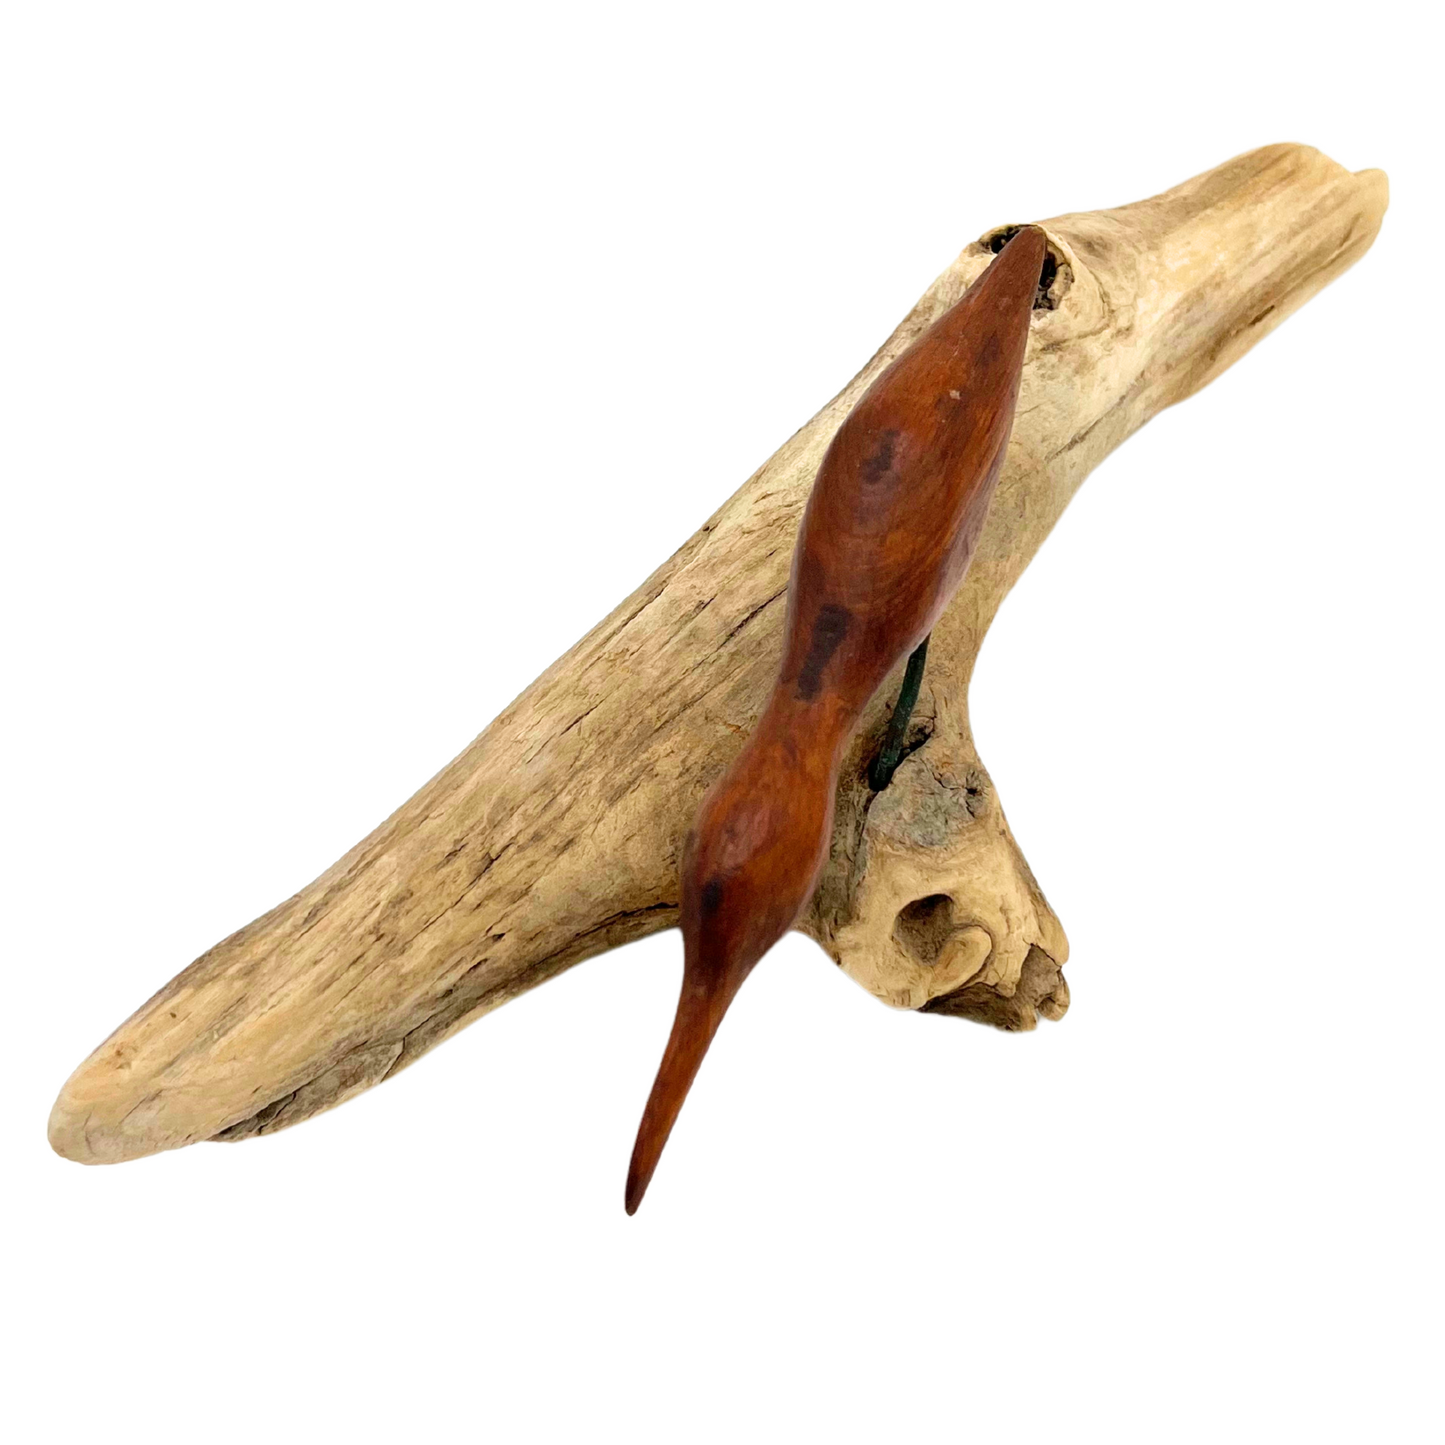 carved wooden shore bird on driftwood